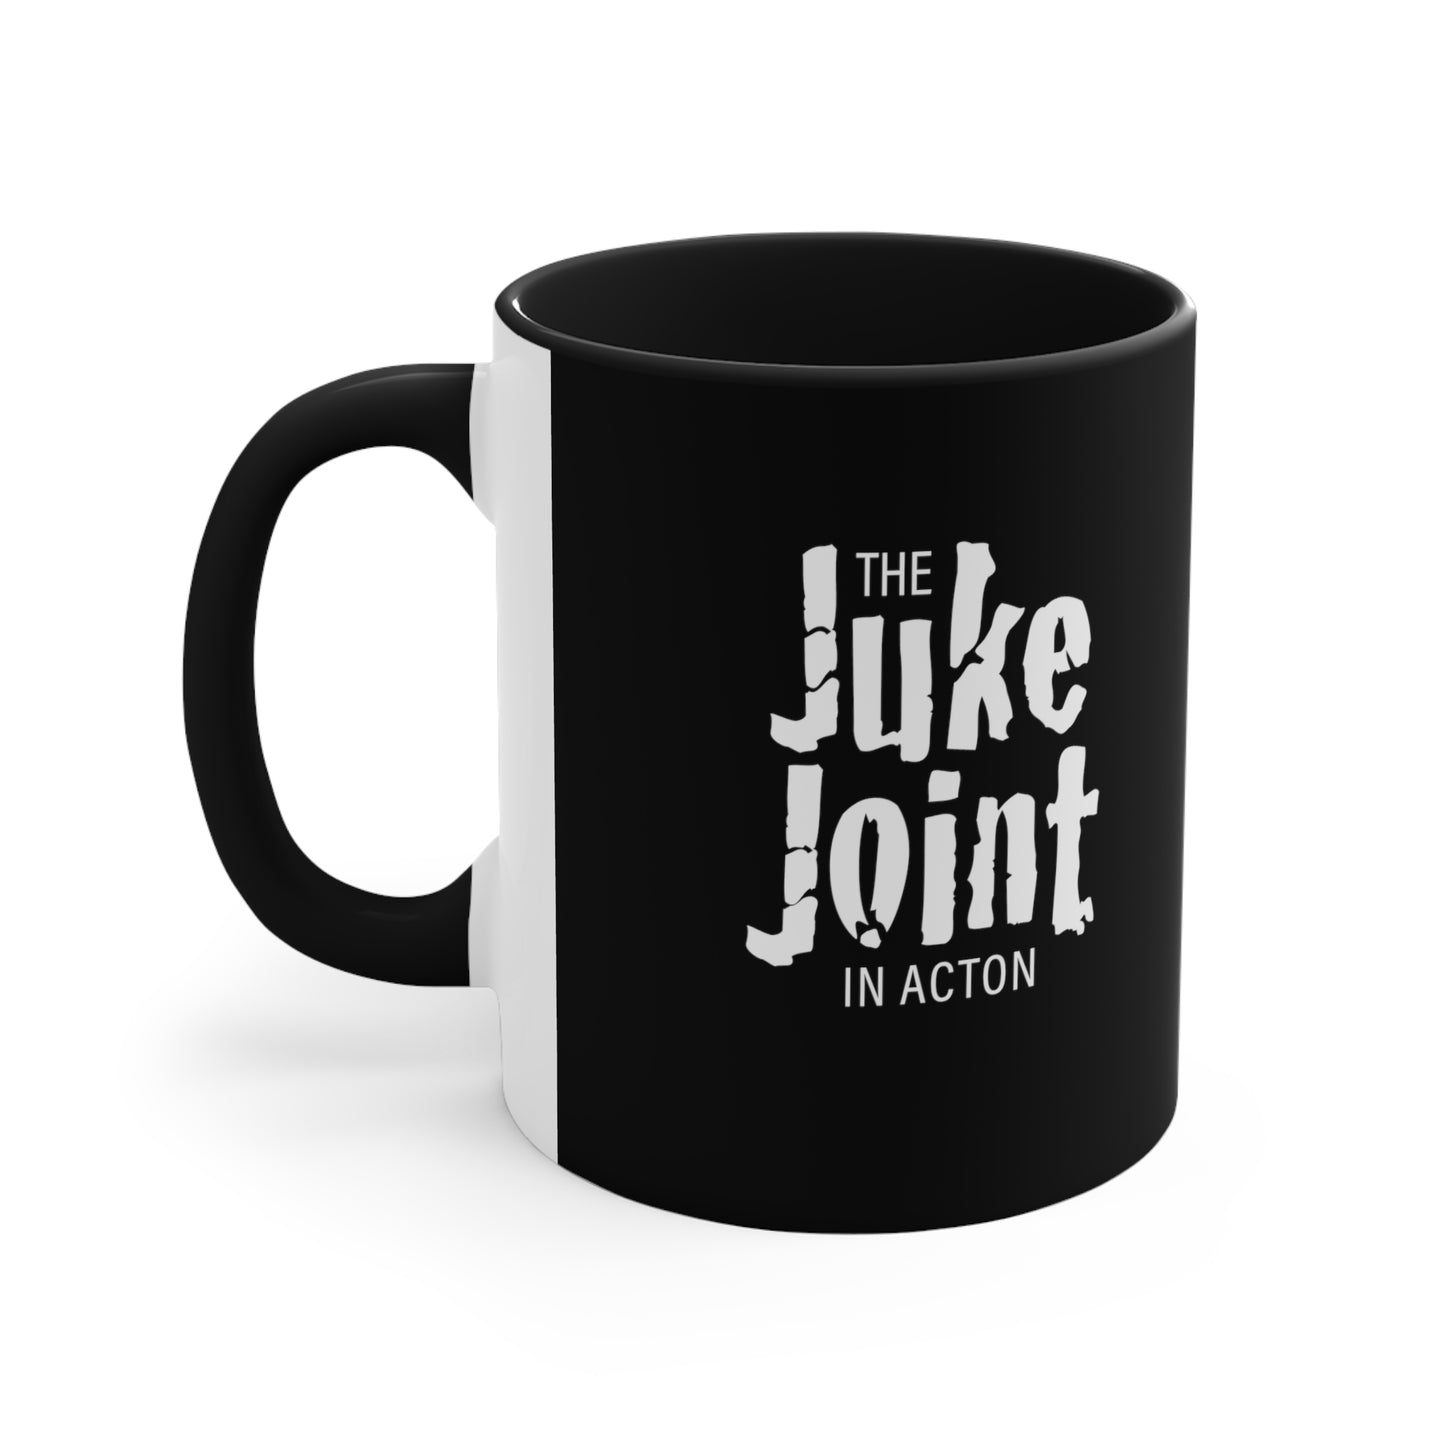 RECIPE for the BLUES Coffee Mug, with Gretsch Electric Guitar and Juke Joint in Acton logo, Music fan Gift, 11oz, Blue or Black for Blues Fans